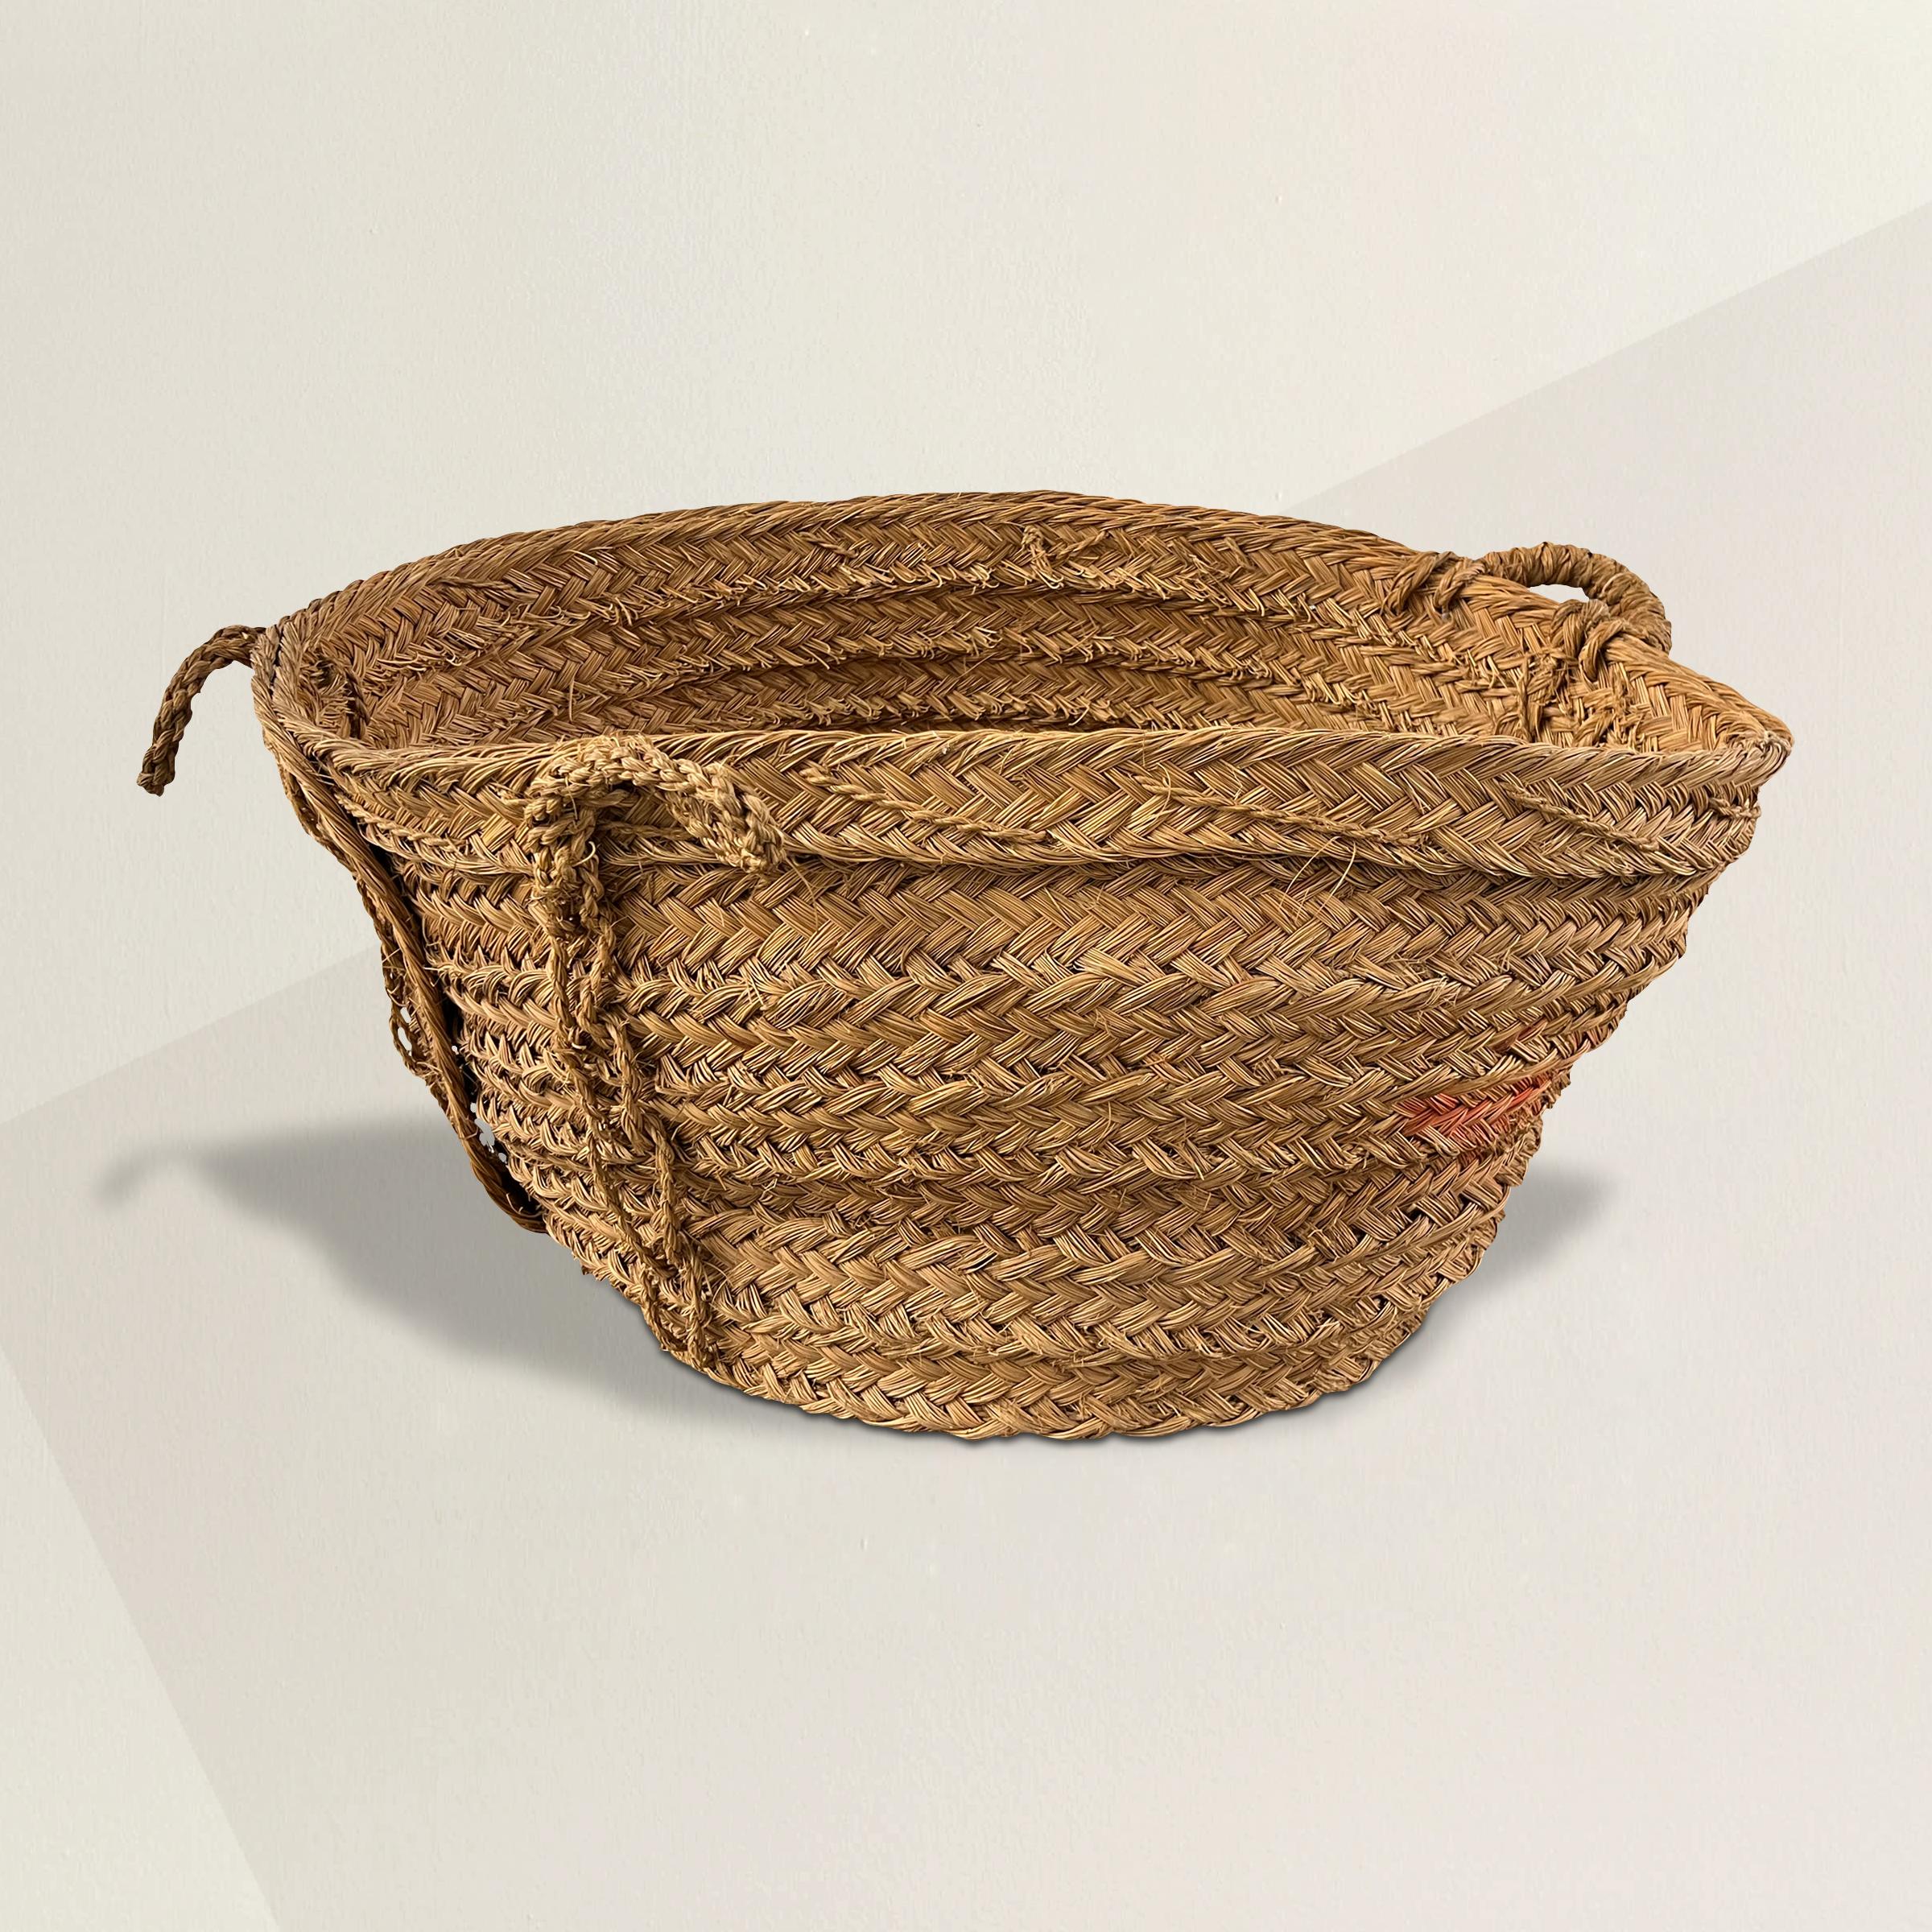 A rather large vintage French handwoven vineyard basket from Bordeaux, with three loop handles and a fun wonky shape. Perfect for storing extra blankets and pillows under a console in your bedroom, or filled with kid's toys in the playroom.